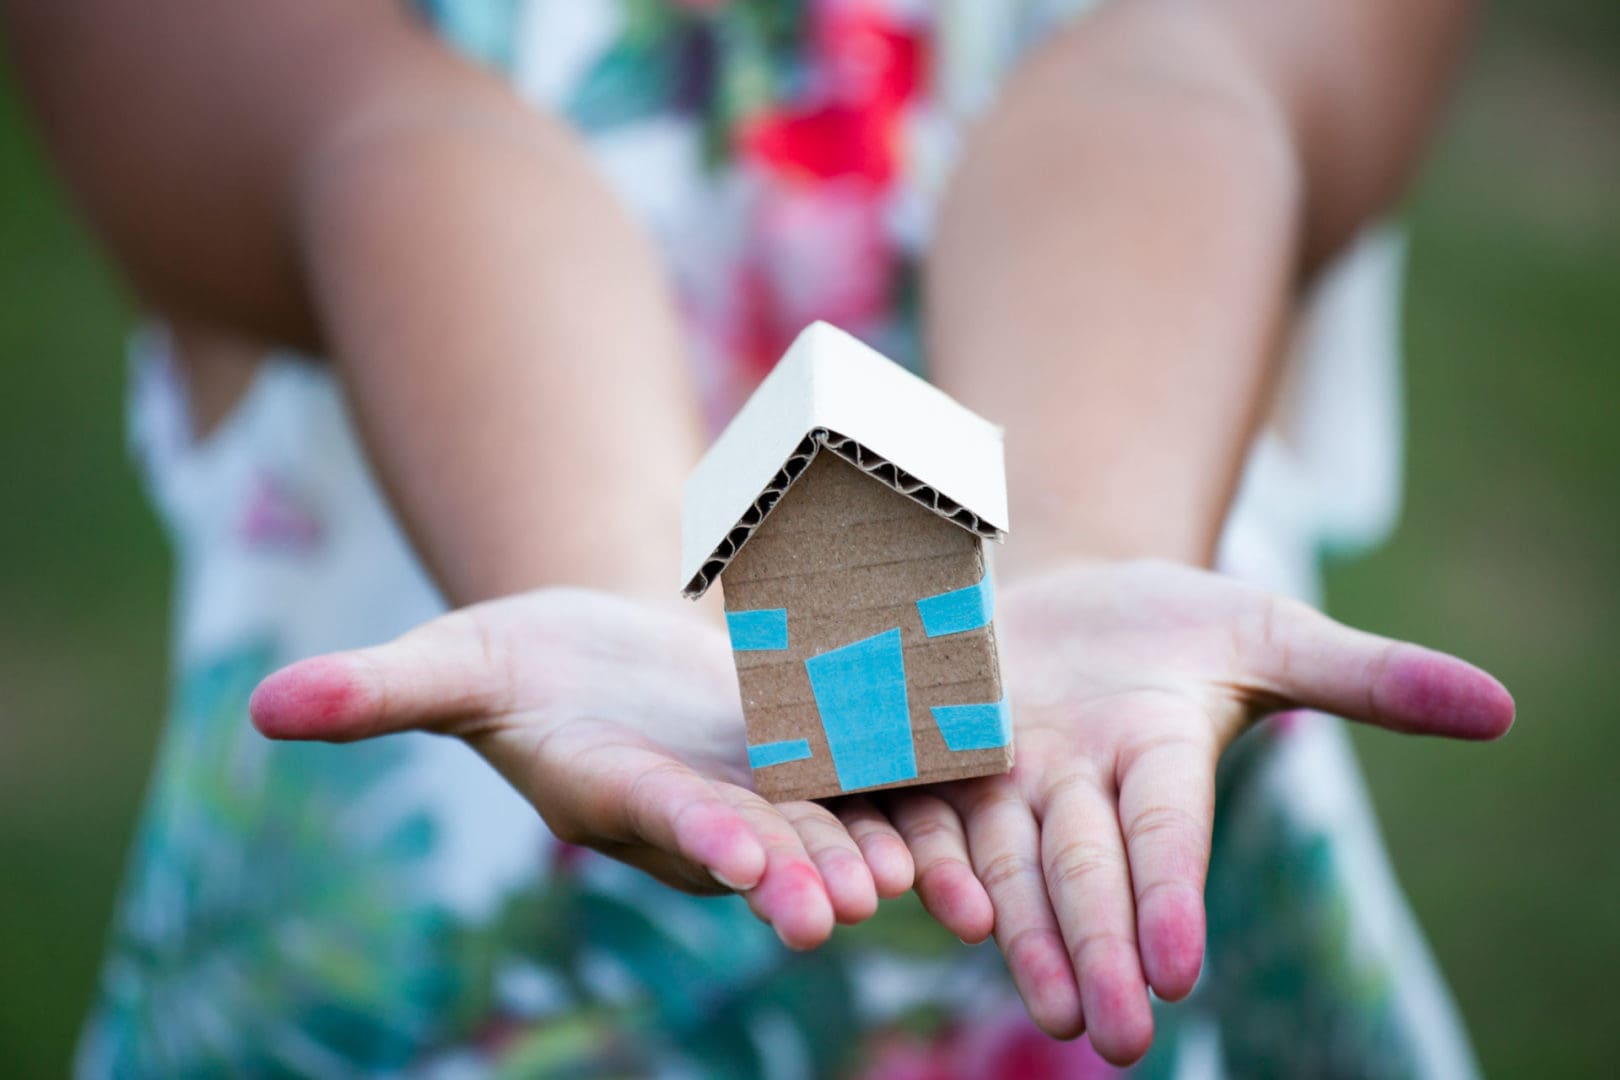 A girl holding a cardboard house in her hands.